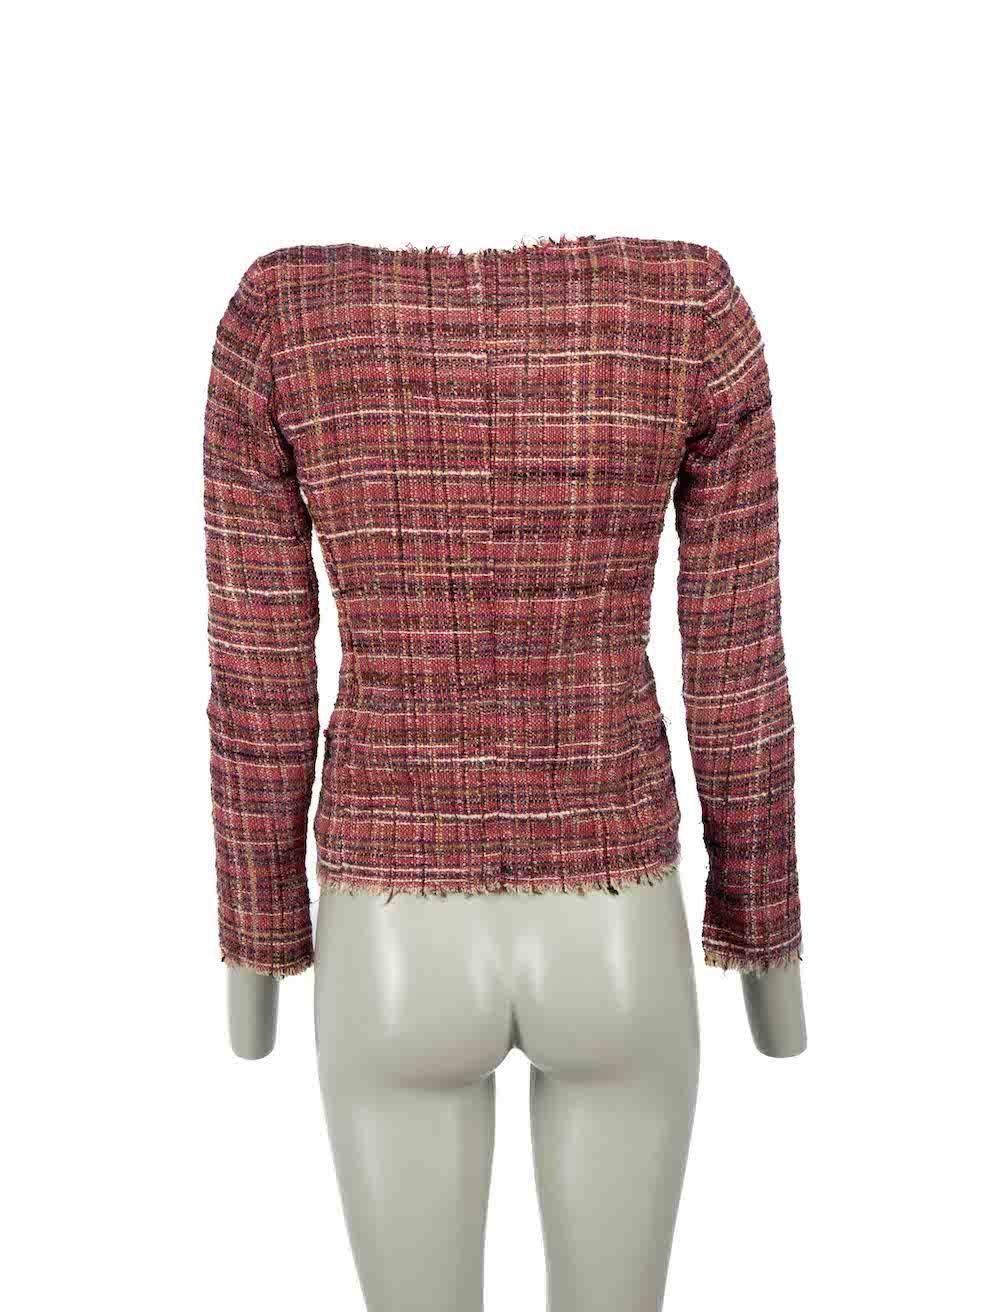 Isabel Marant Isabel Marant Etoile Red Checked Fringed Boucle Jacket Size XS In Excellent Condition For Sale In London, GB